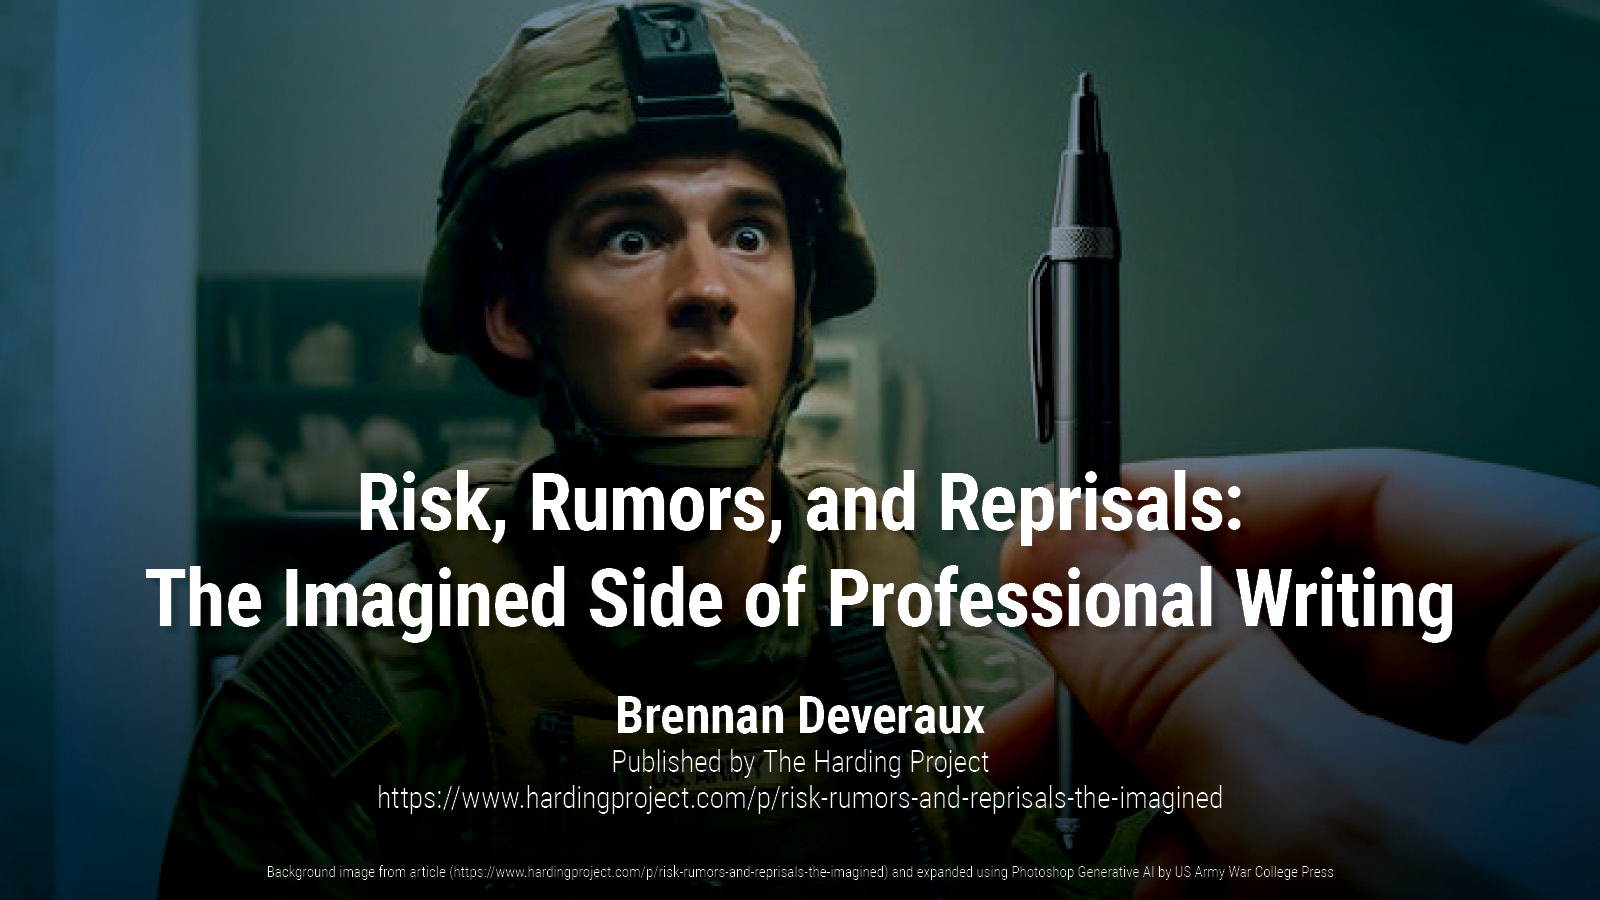 Risk, Rumors, and Reprisals: The Imagined Side of Professional Writing | Brennan Deveraux